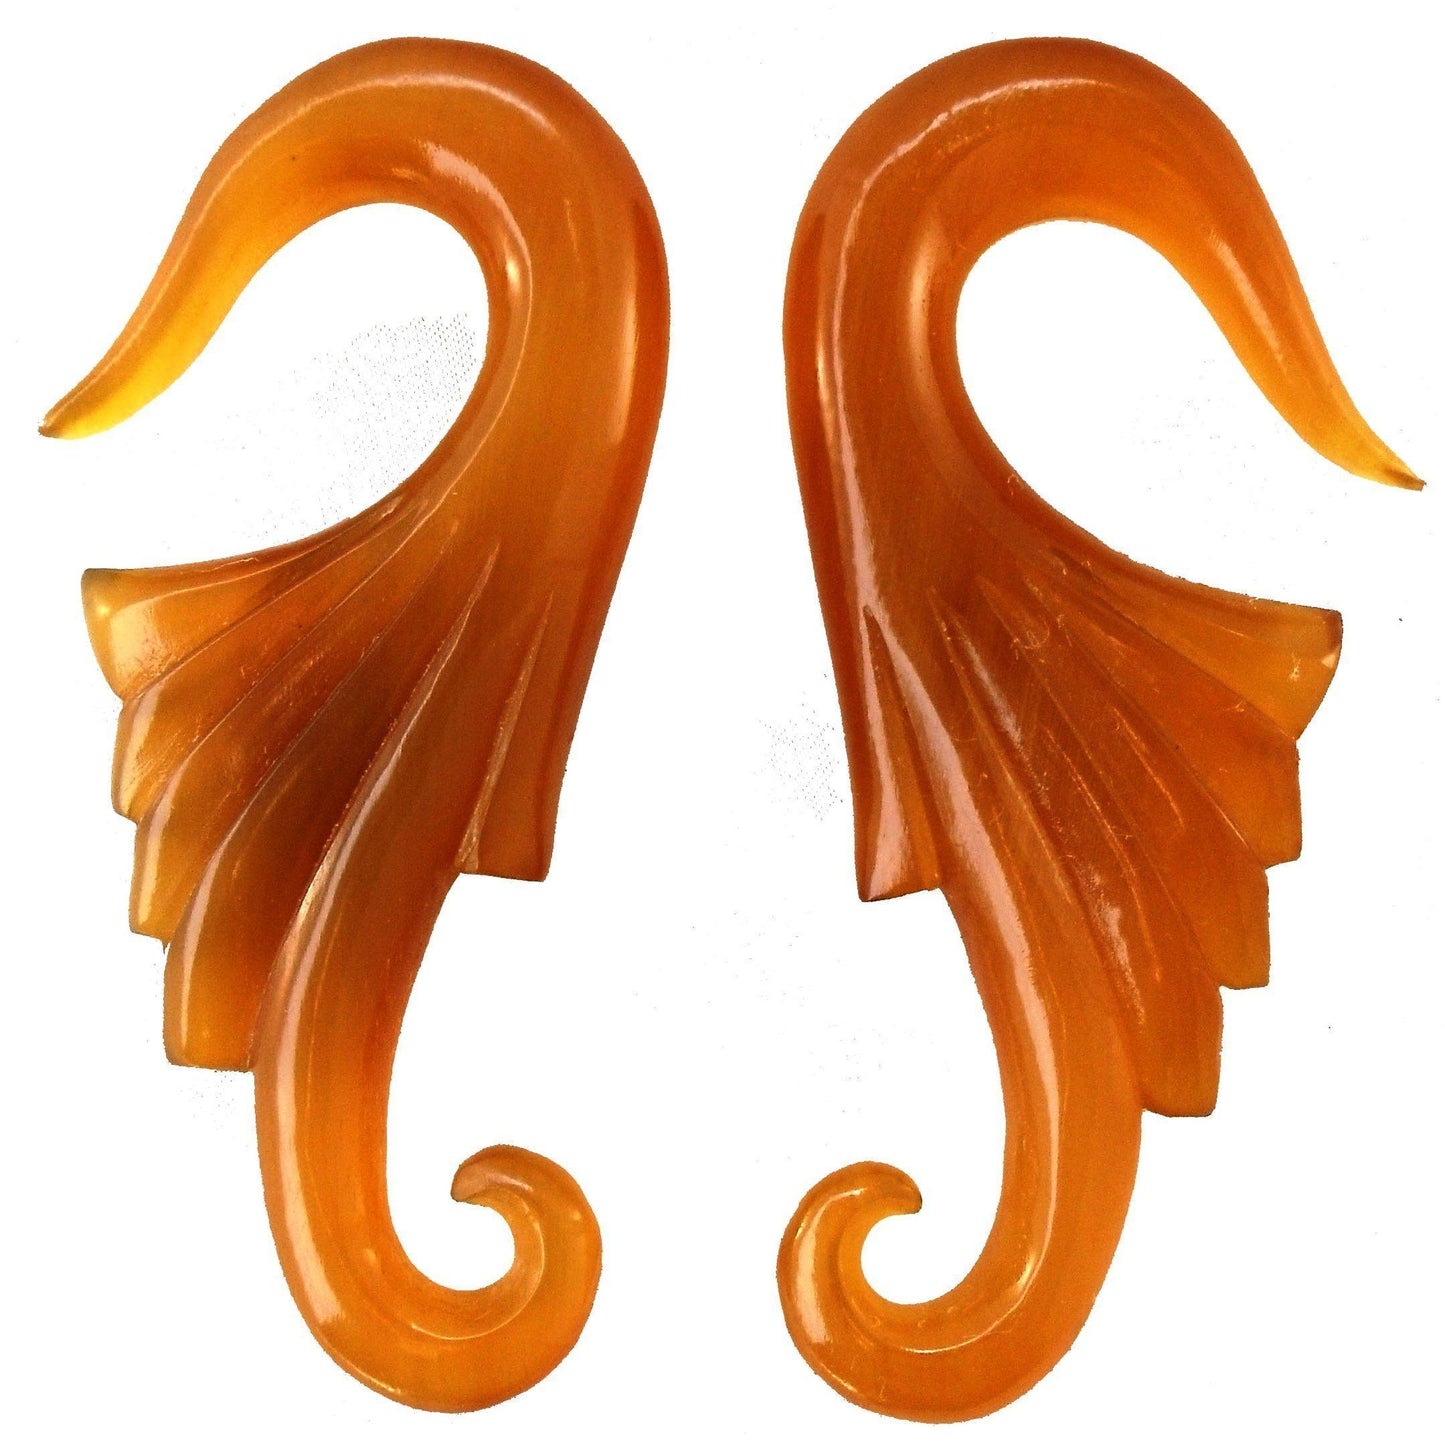 Organic Body Jewelry :|: Nouveau Wings. Amber Horn 00g, Organic Body Jewelry. | Tribal Body Jewelry